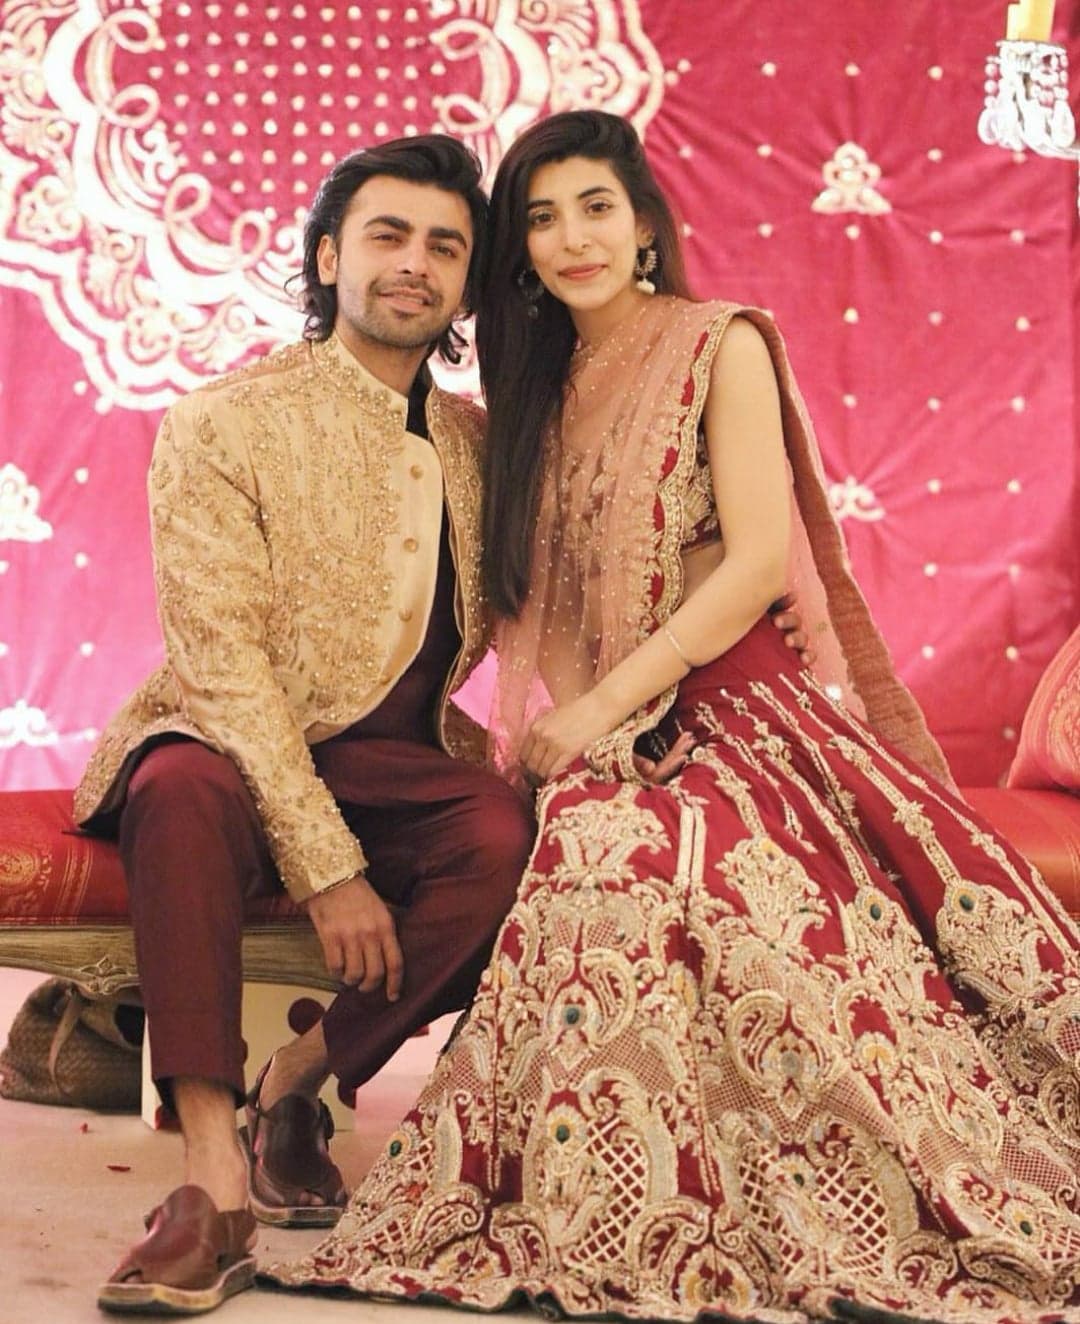 Top 10 Matching Outfits Worn By Pakistani Celebrity Couples